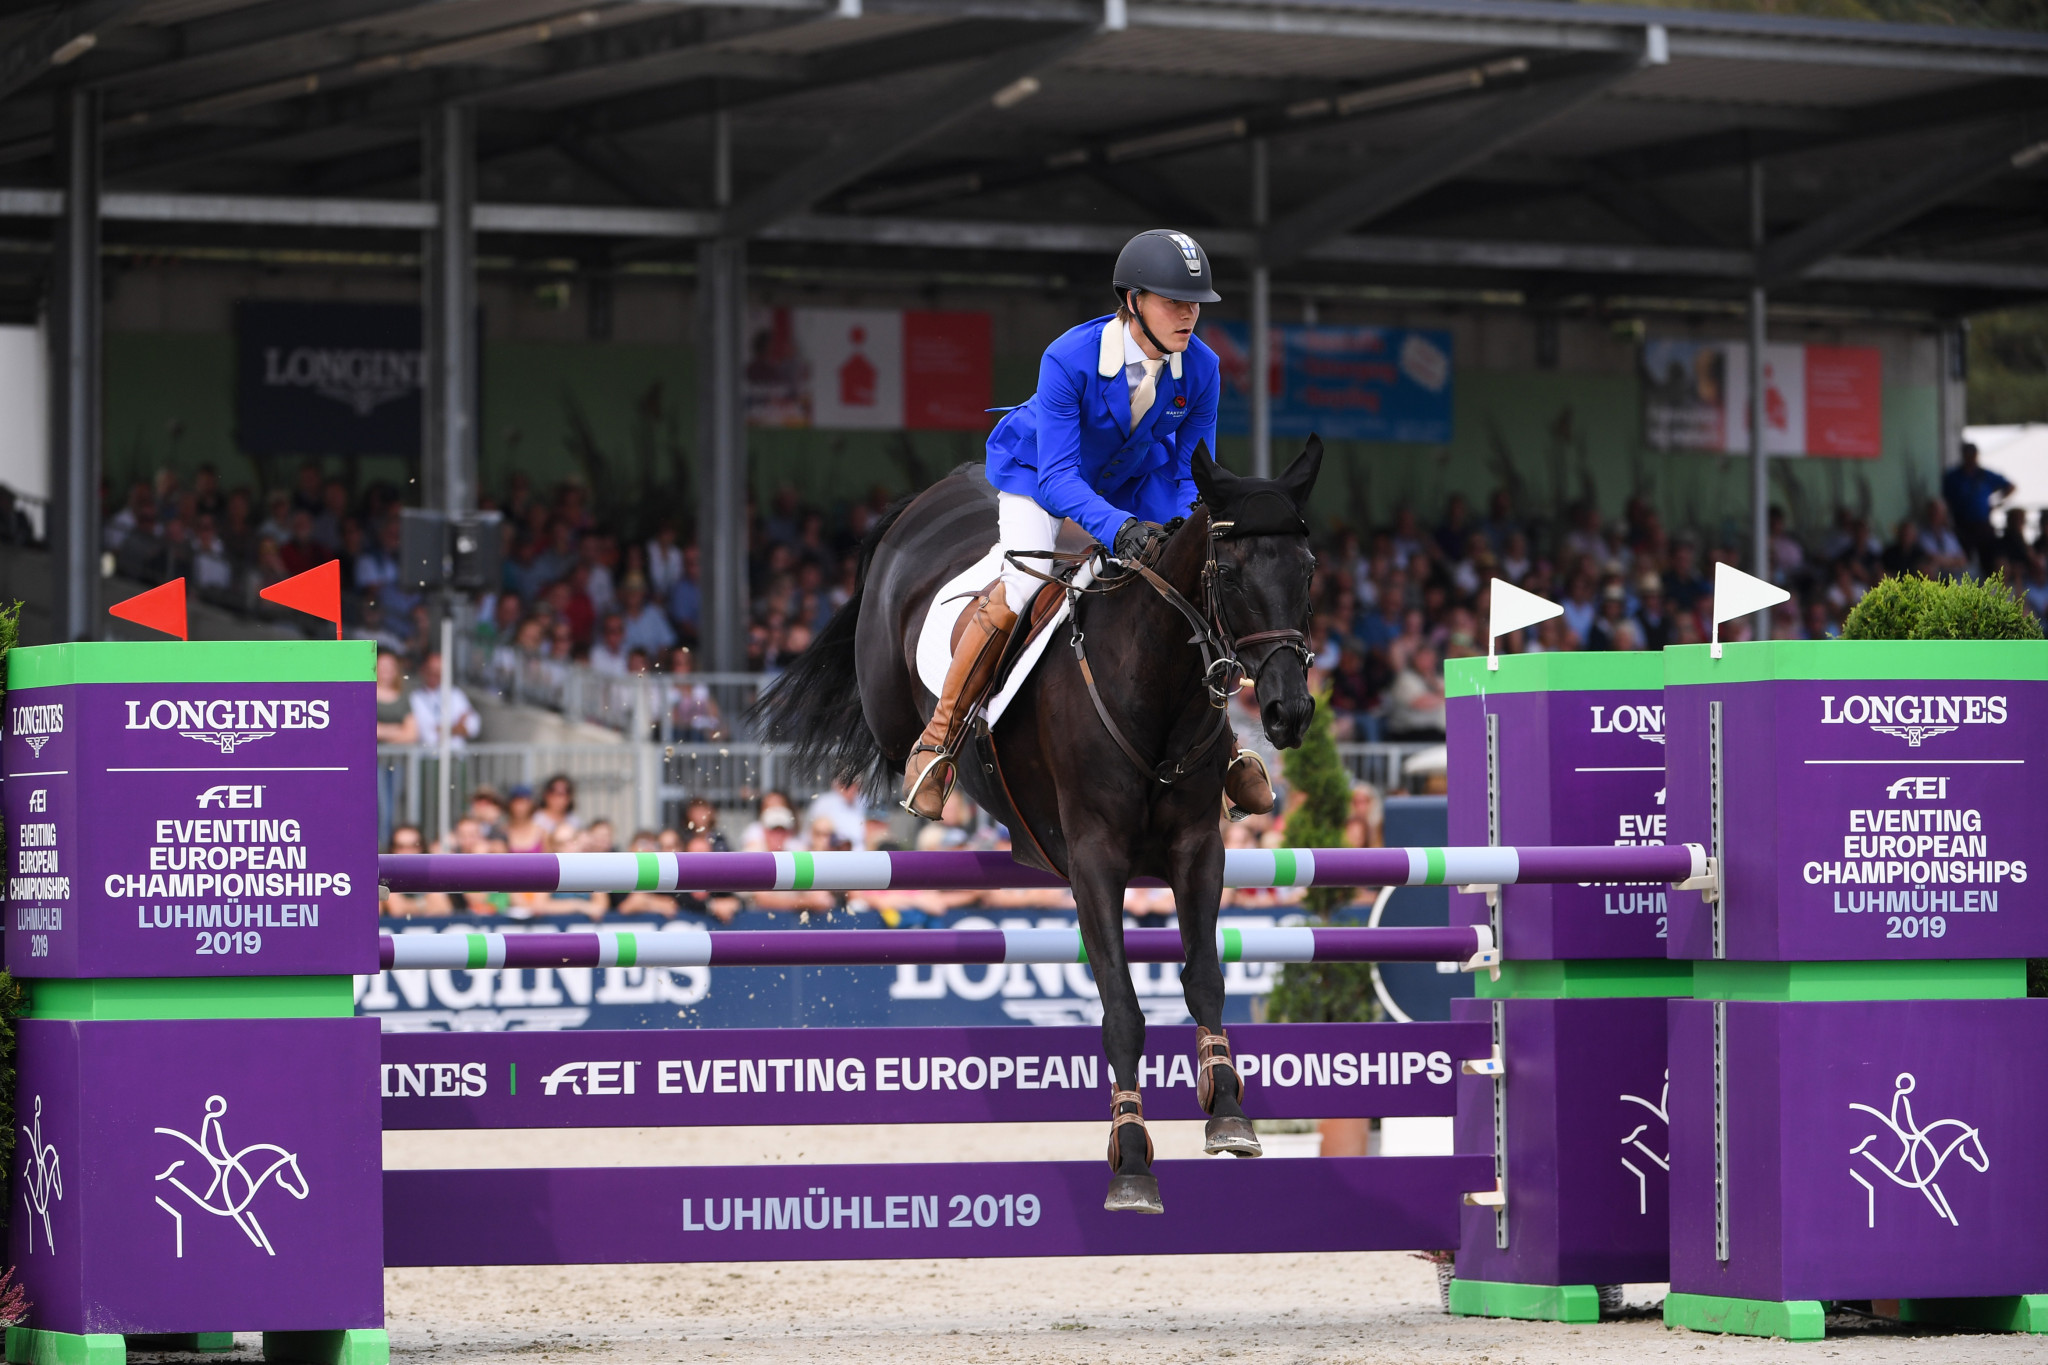 Avenches replaces Haras du Pin as host of 2021 FEI Eventing European Championships